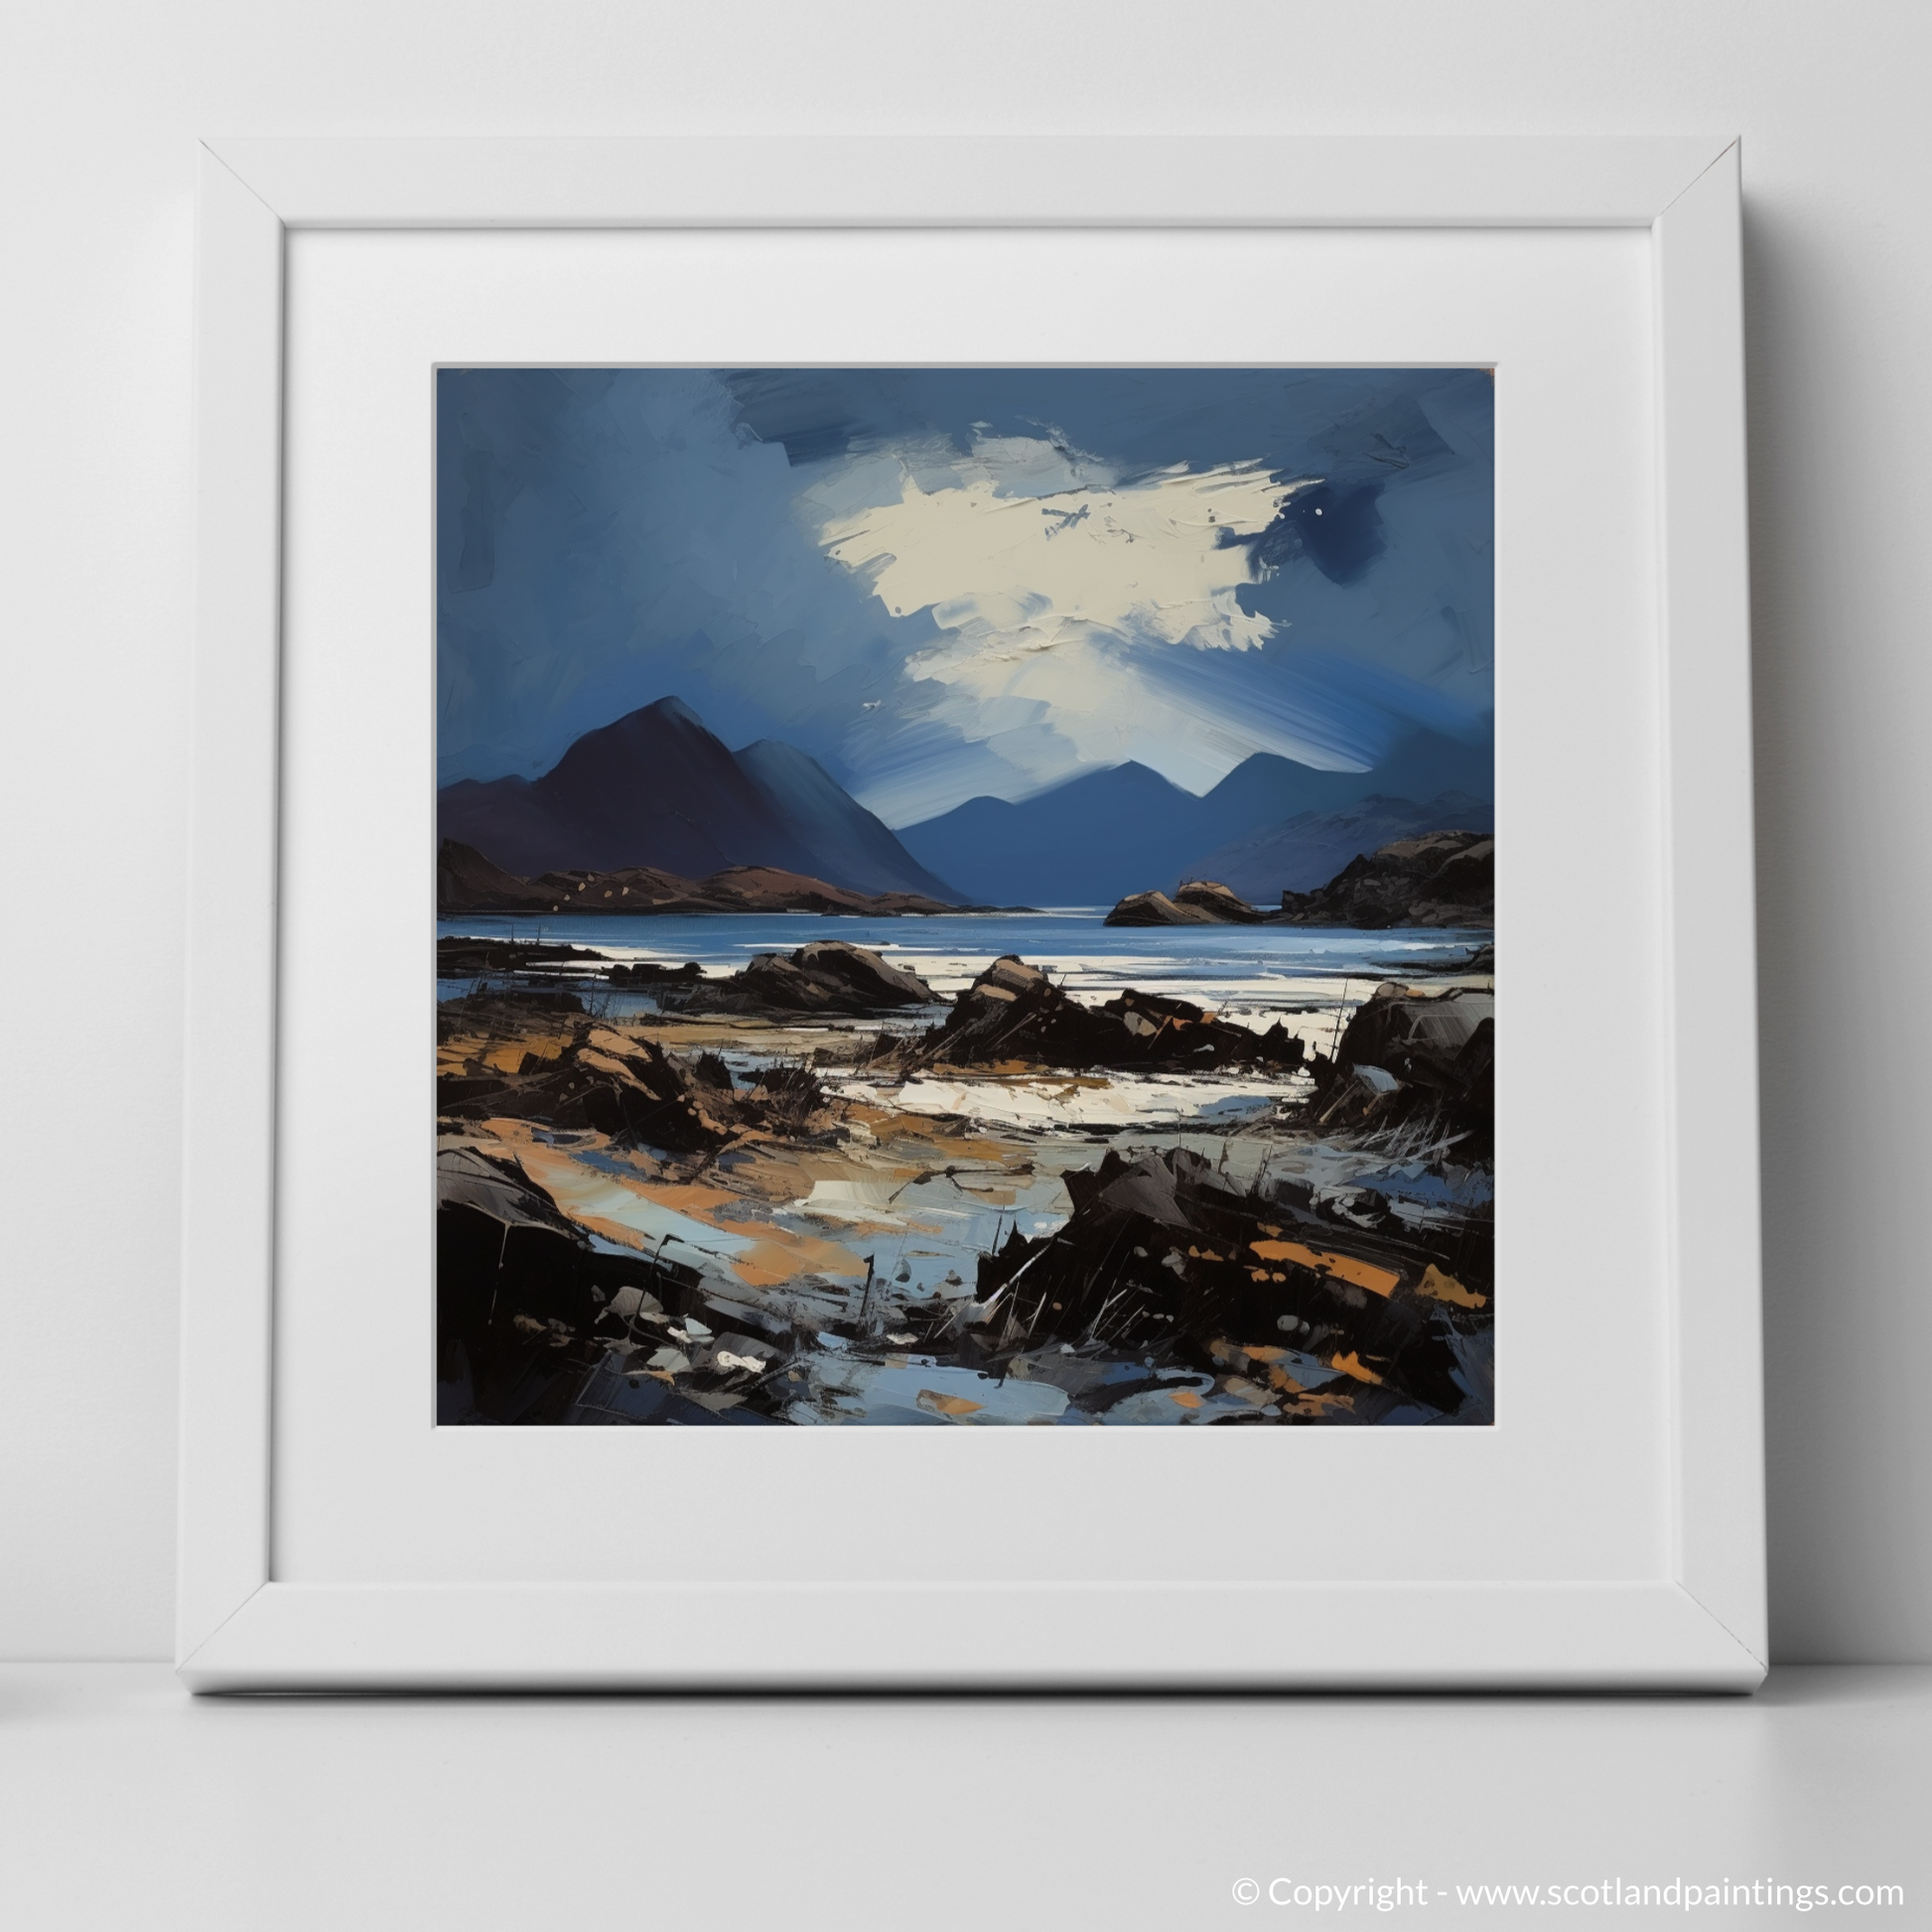 Art Print of Isle of Rum, Inner Hebrides with a white frame